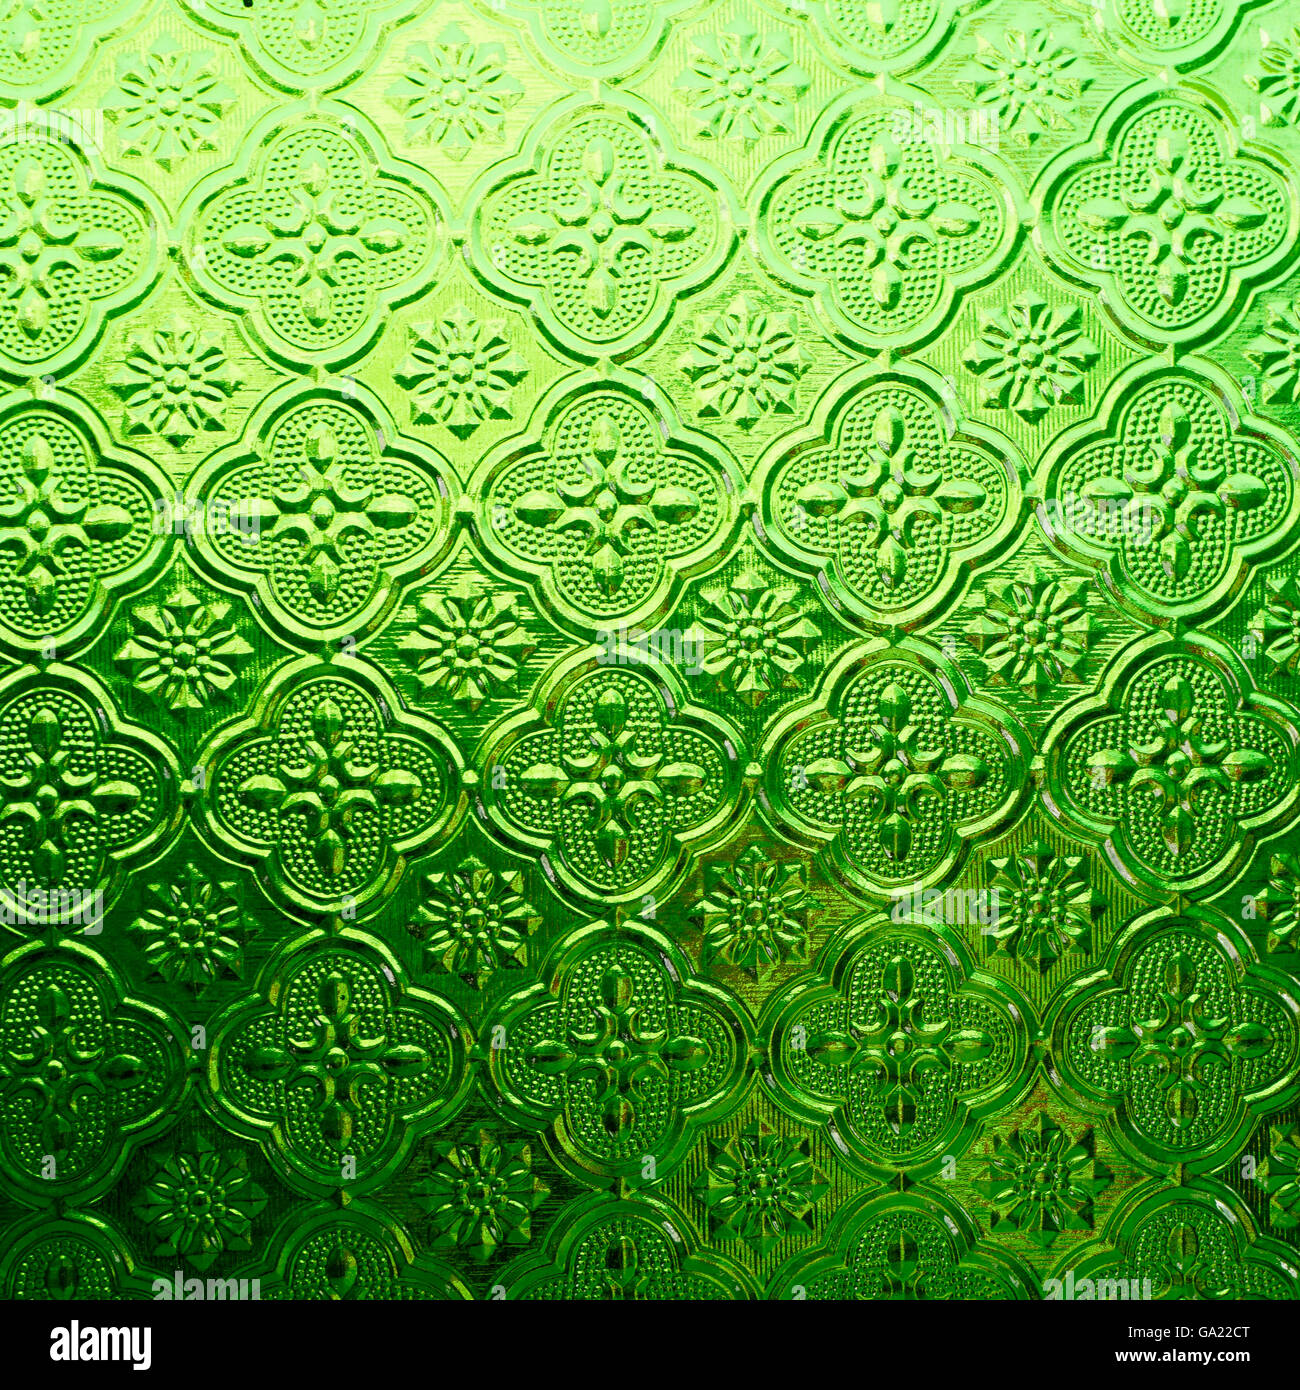 green color glass with thai pattern style Stock Photo